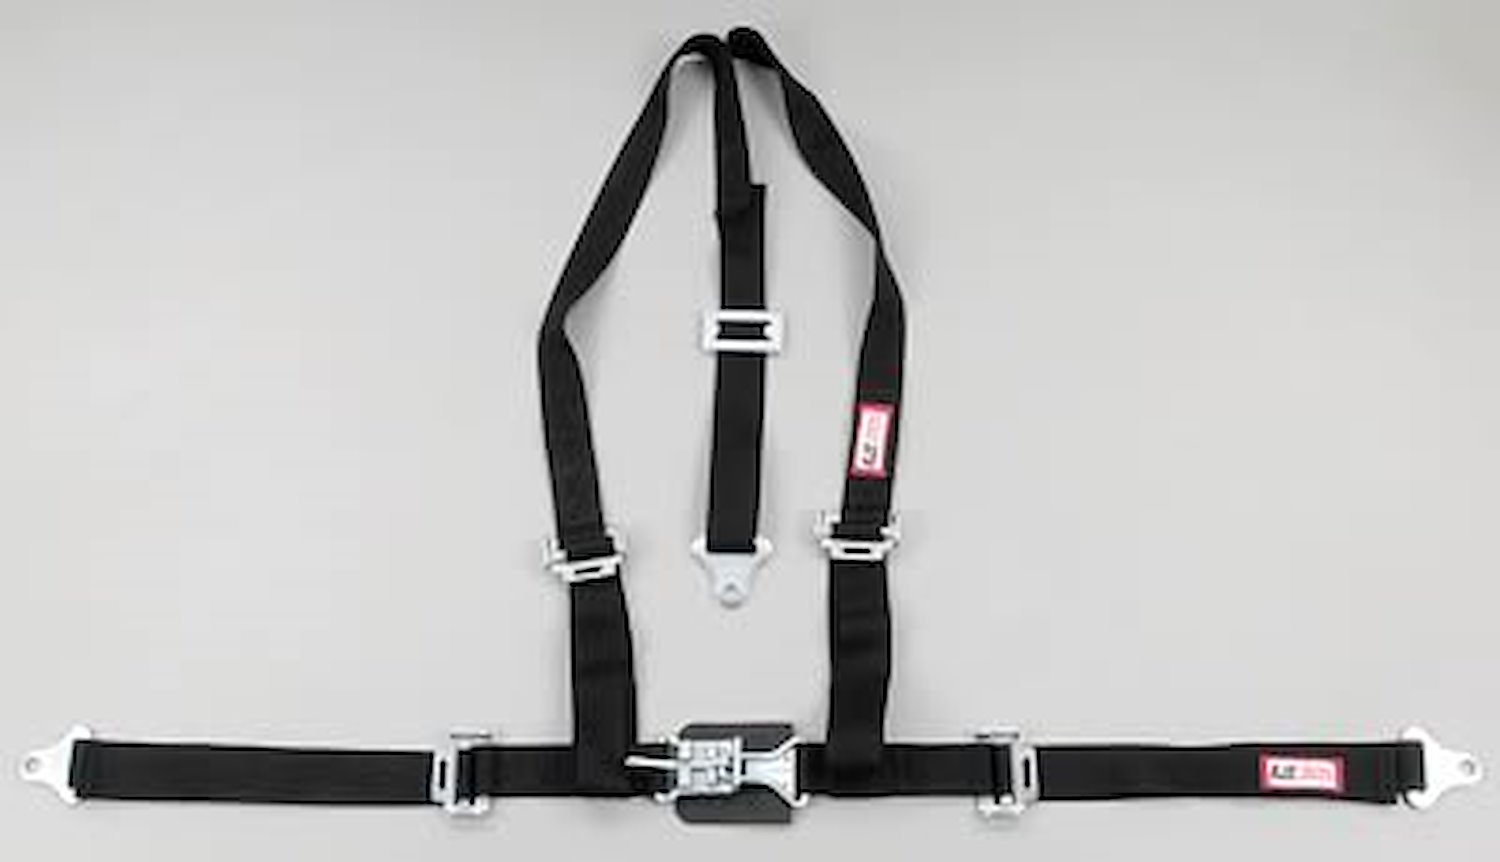 NON-SFI L&L HARNESS 2 PULL UP Lap Belt SNAP SEWN IN 2 S.H. INDIVIDUAL FLOOR Mount WRAP/SNAP BLUE